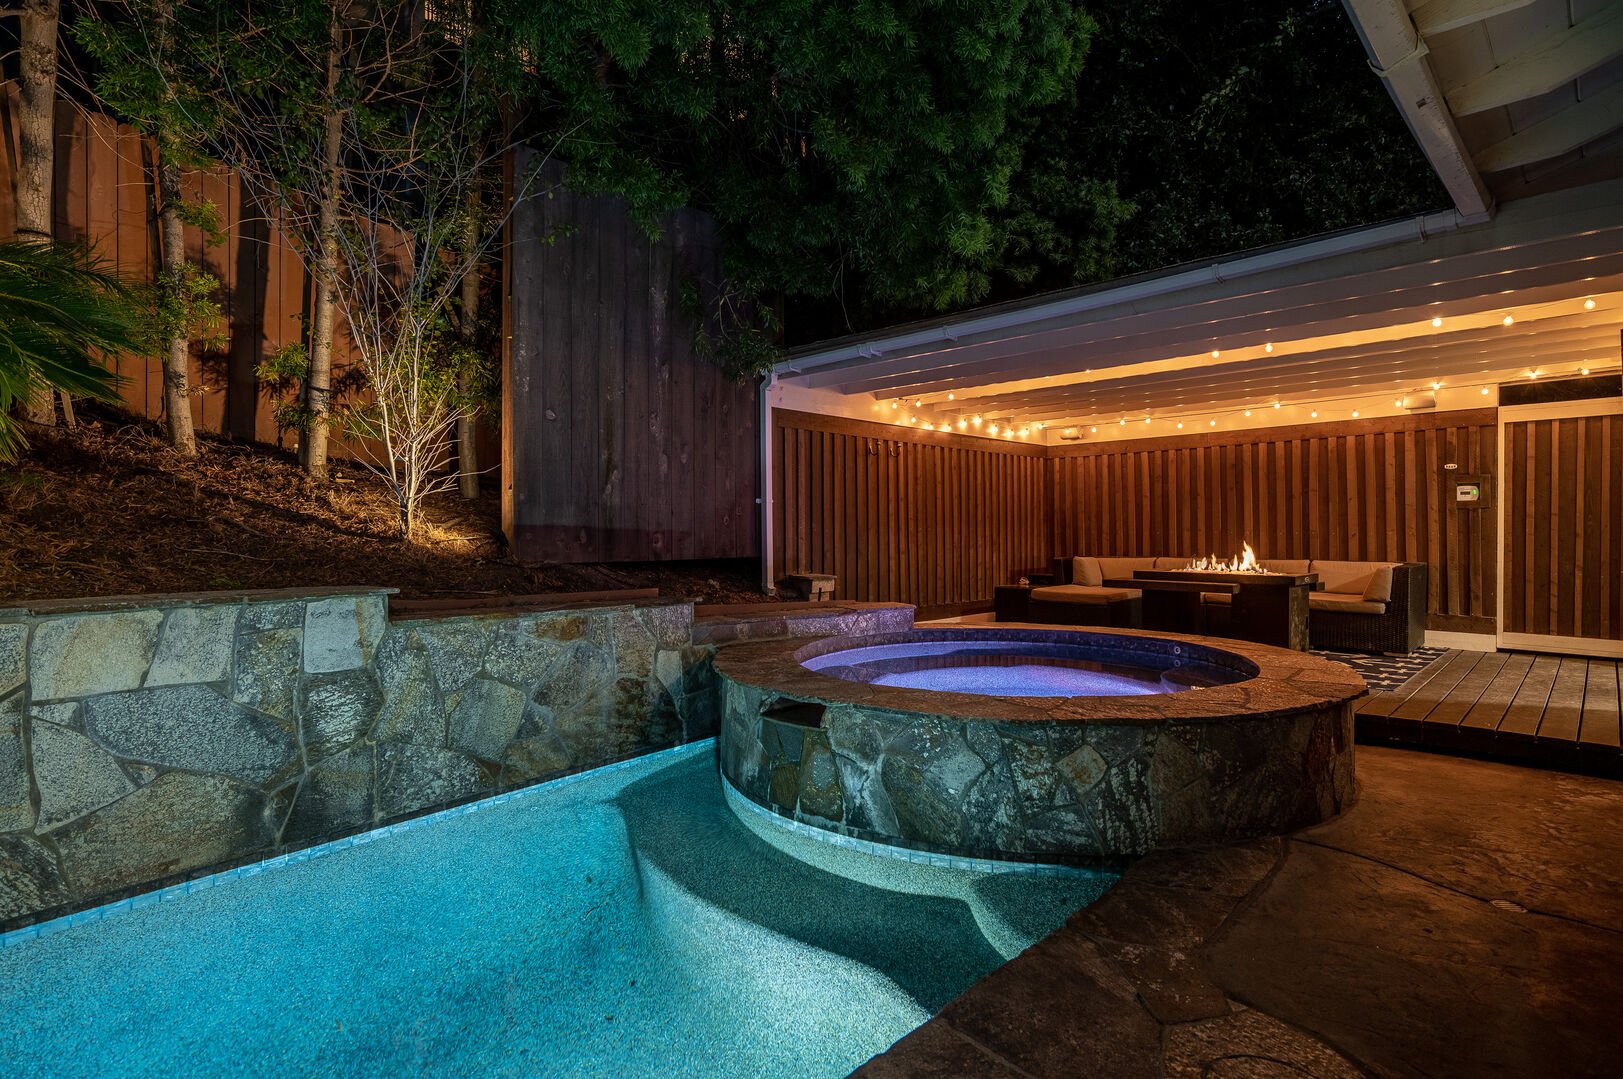 Hot tub jacuzzi with rejuvenating jets and bubbles under a wood cabana